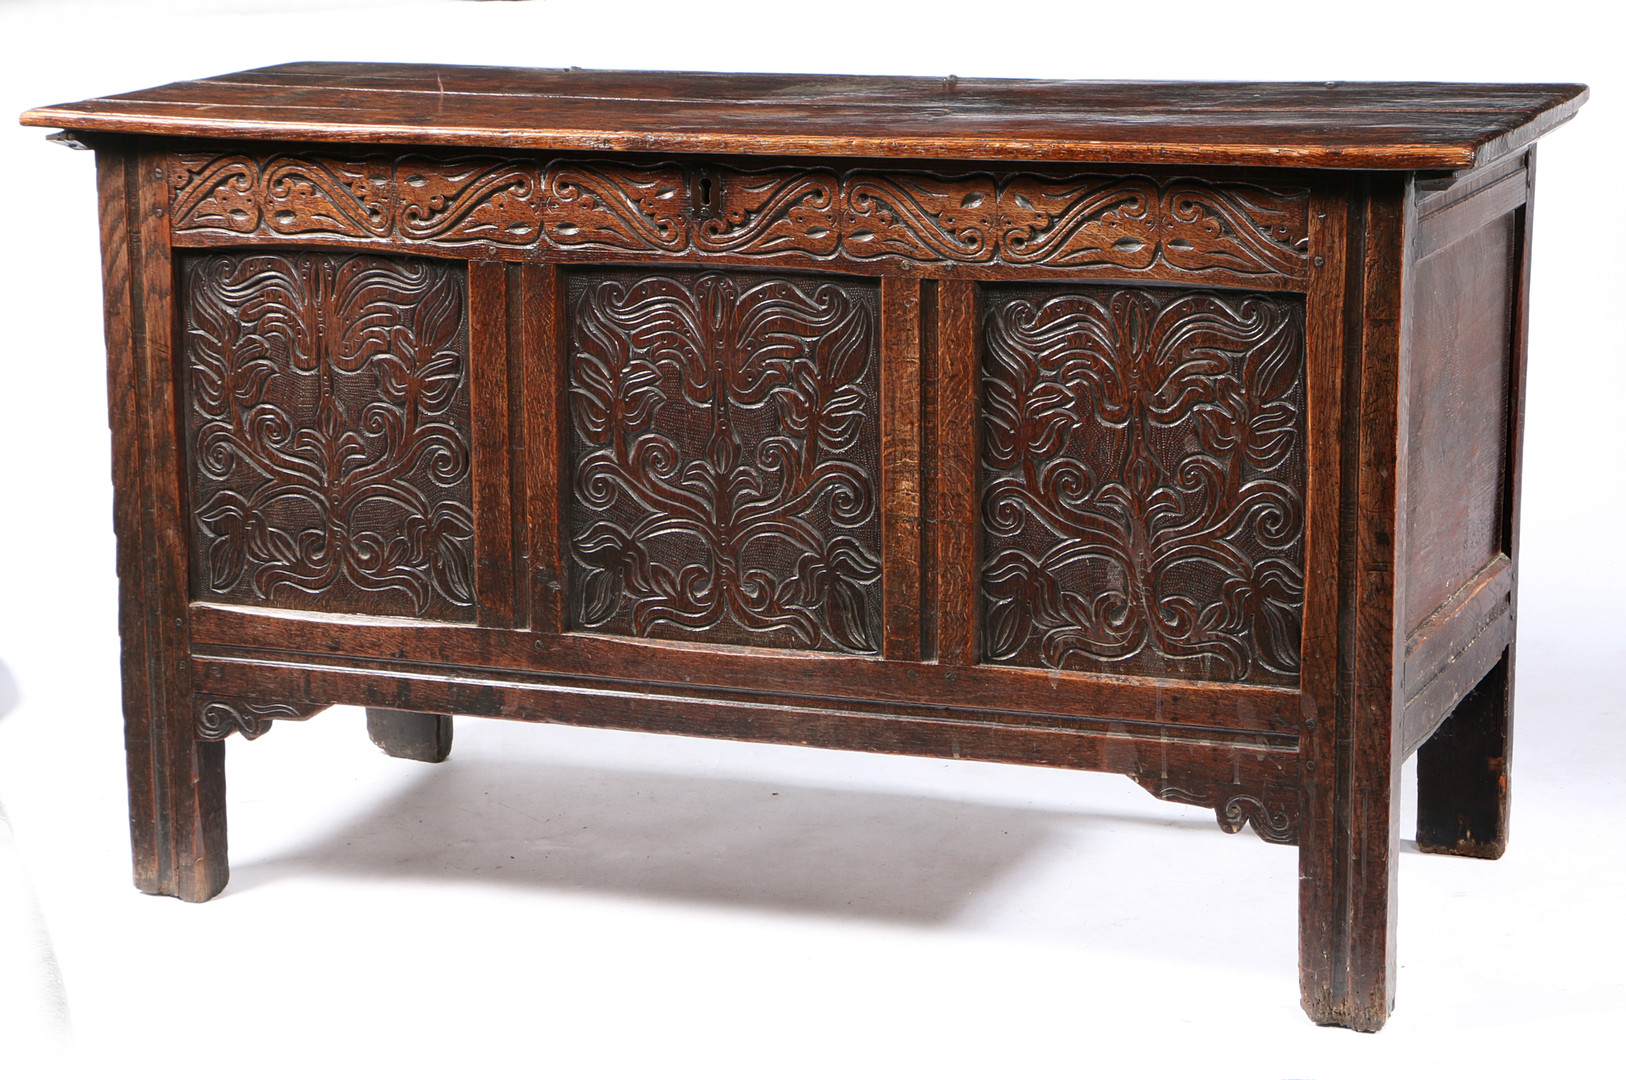 A CHARLES II OAK COFFER, WEST COUNTRY. CIRCA 1670. - Image 3 of 4